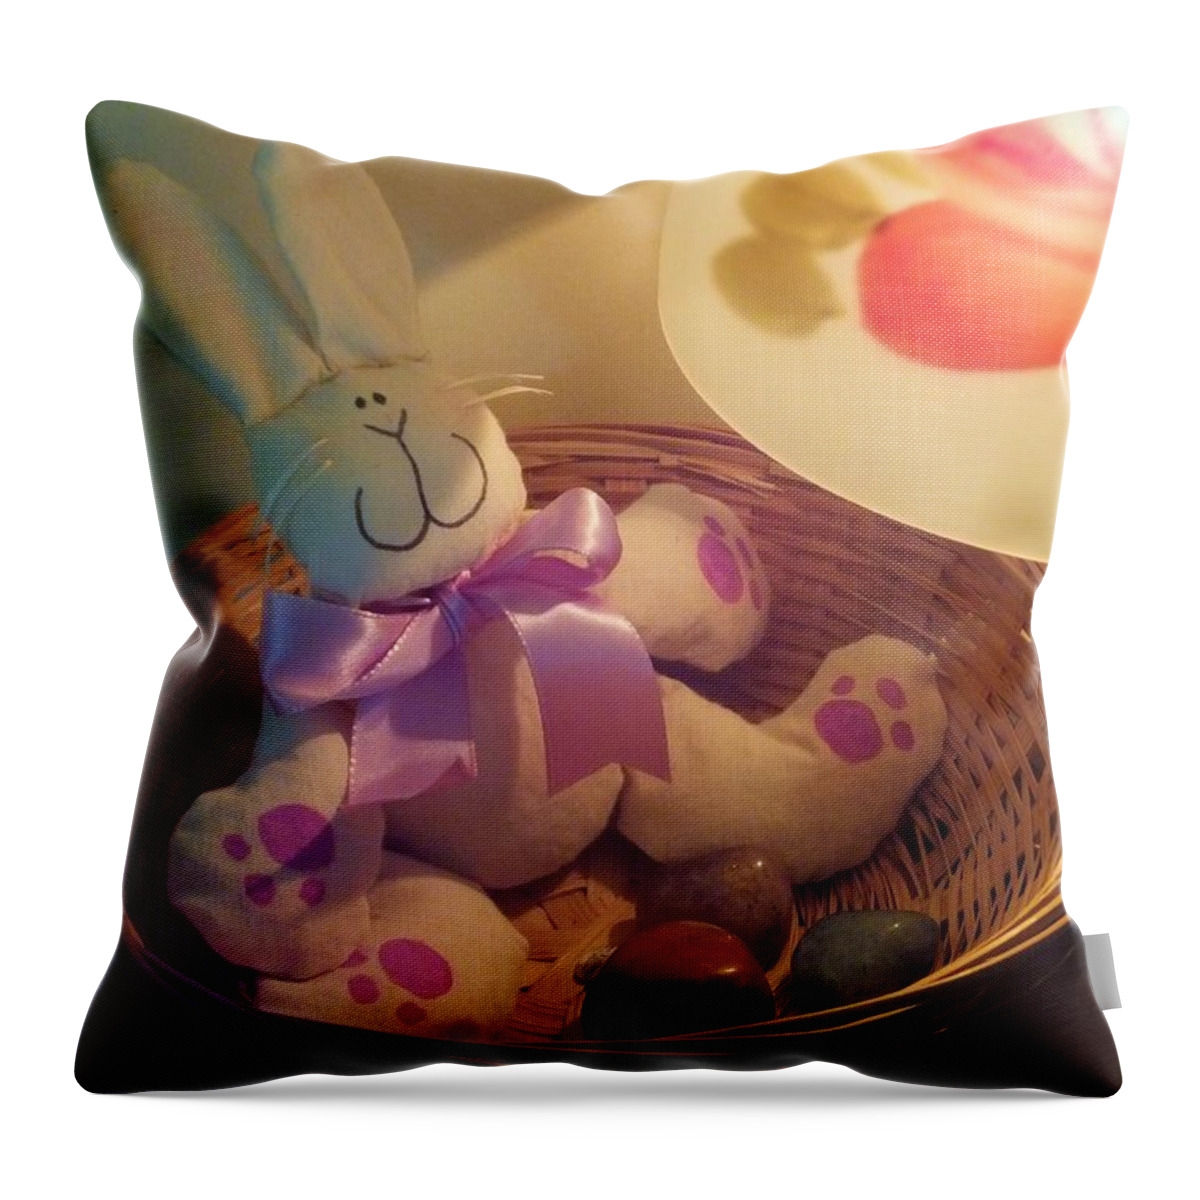 Bunny Throw Pillow featuring the photograph Bunny In A Basket by Denise F Fulmer